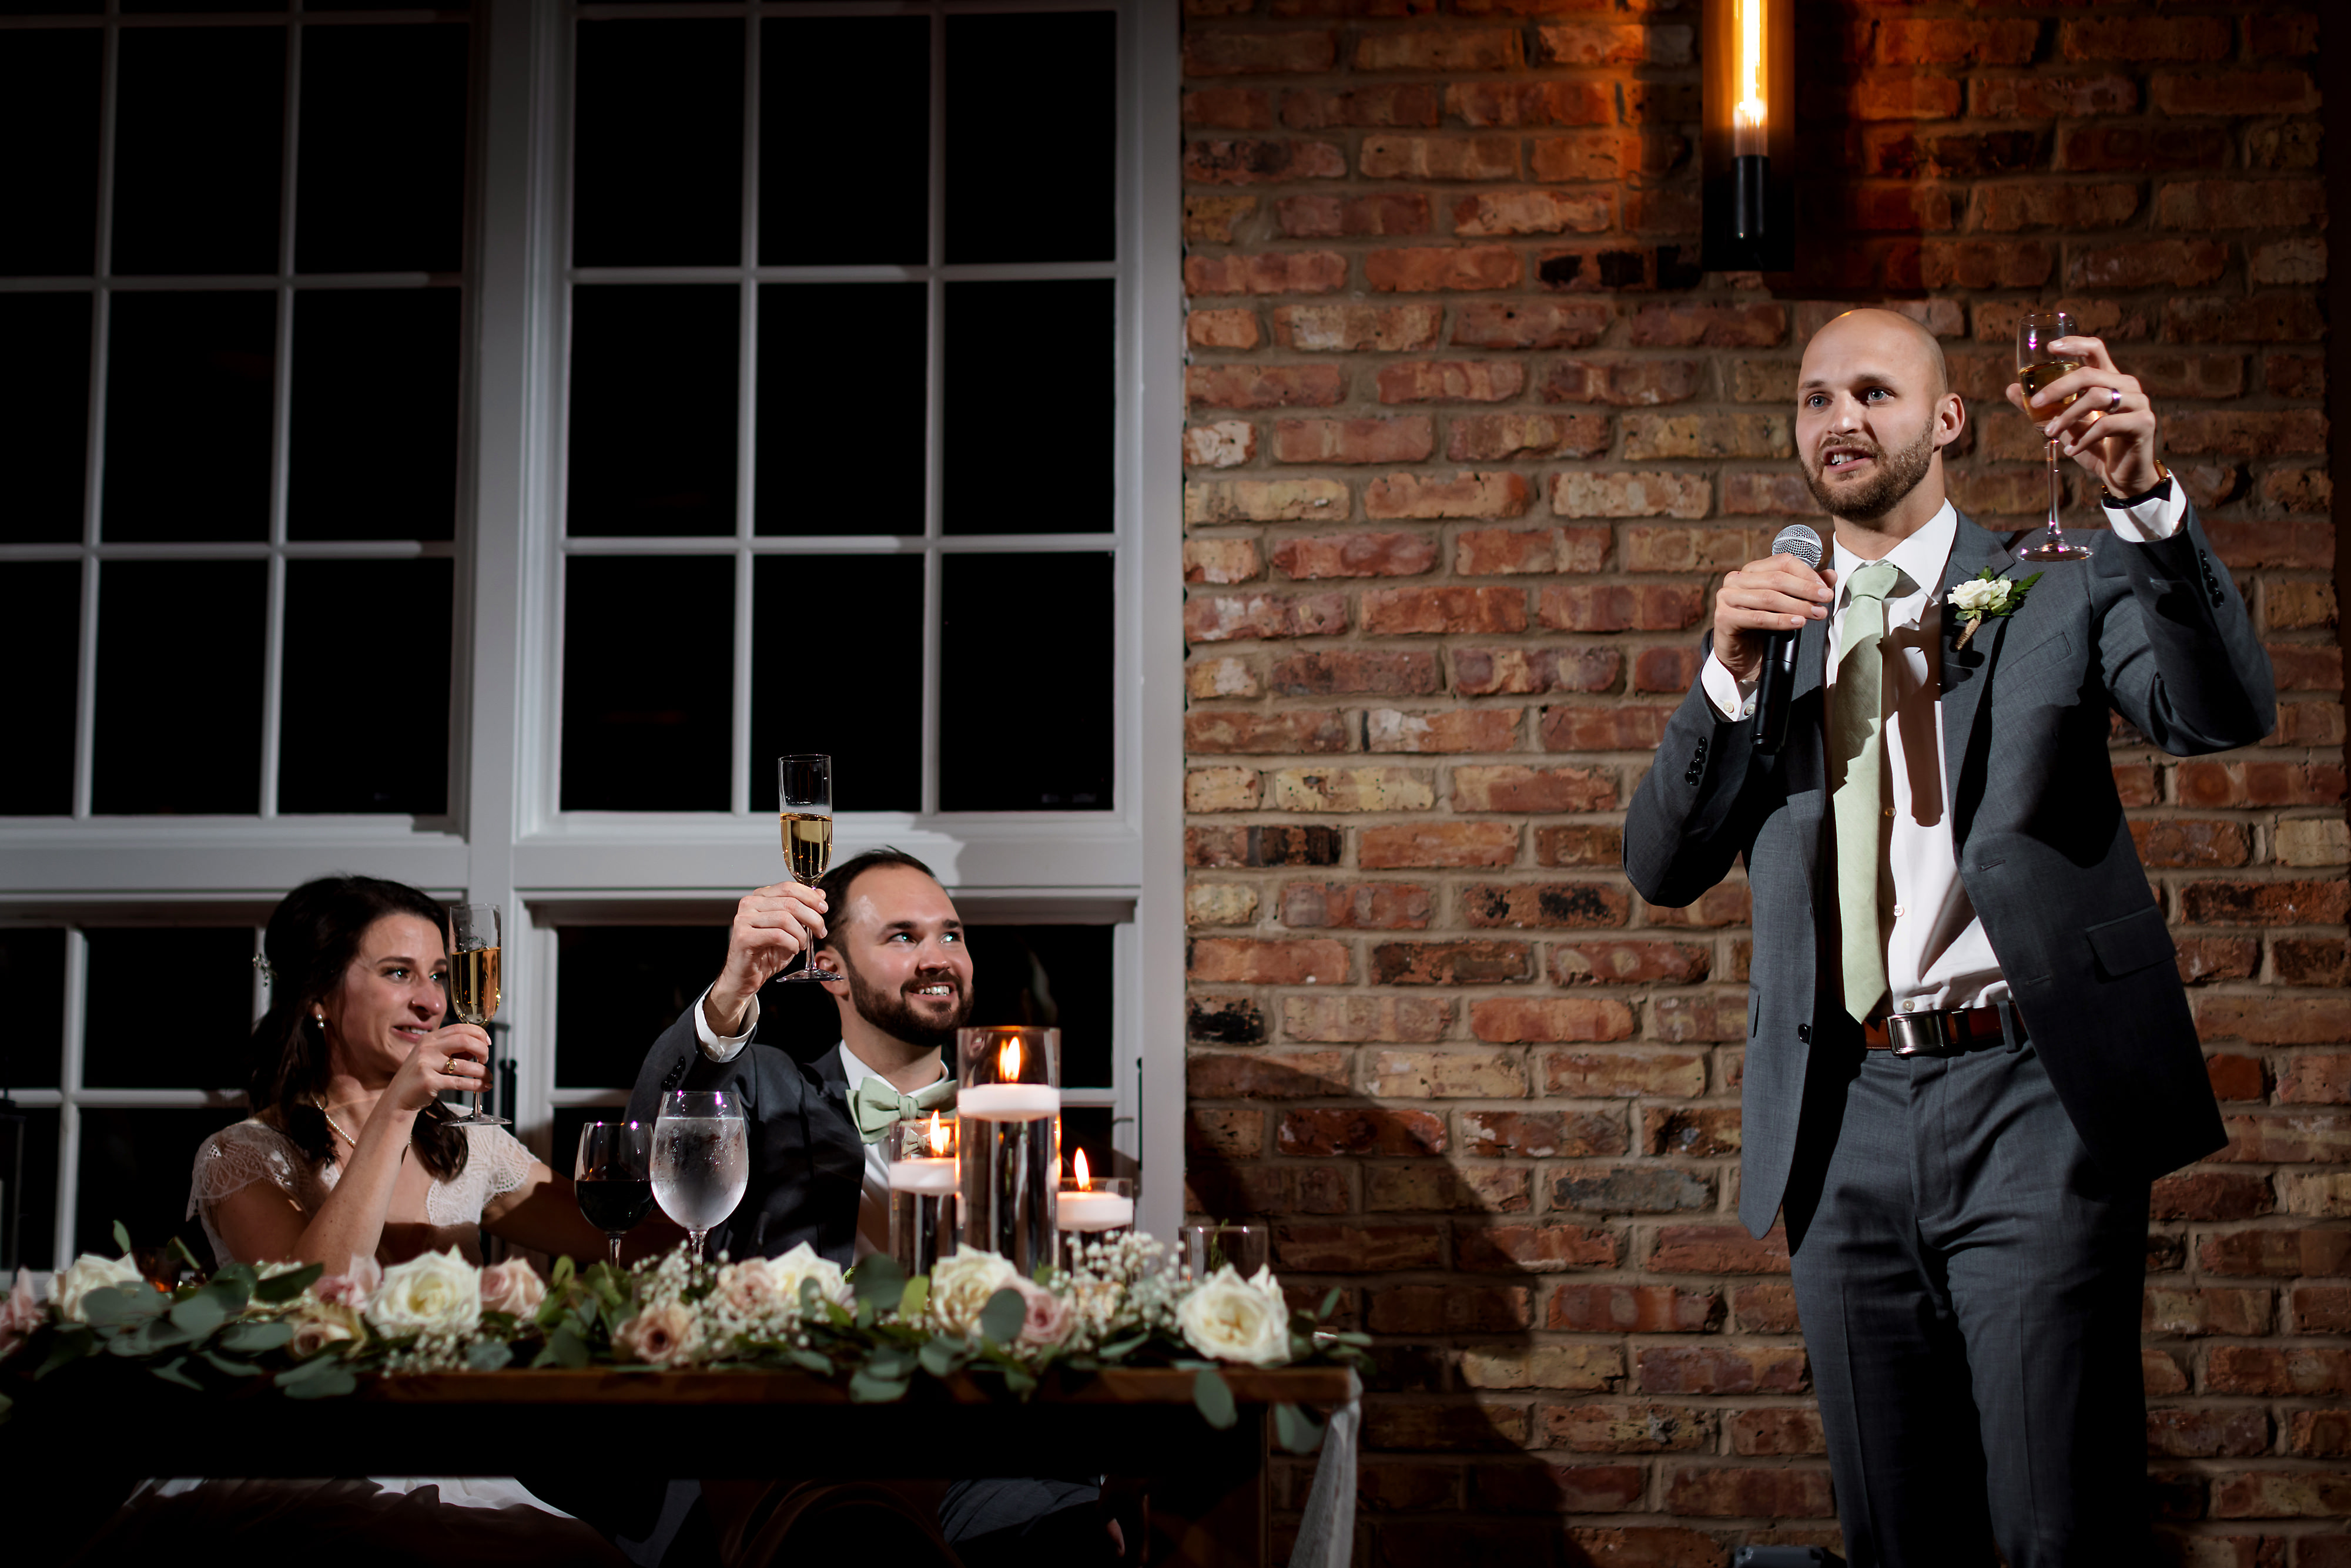 Toasts during wedding reception at Loft Lucia in Chicago's West Loop neighborhood.